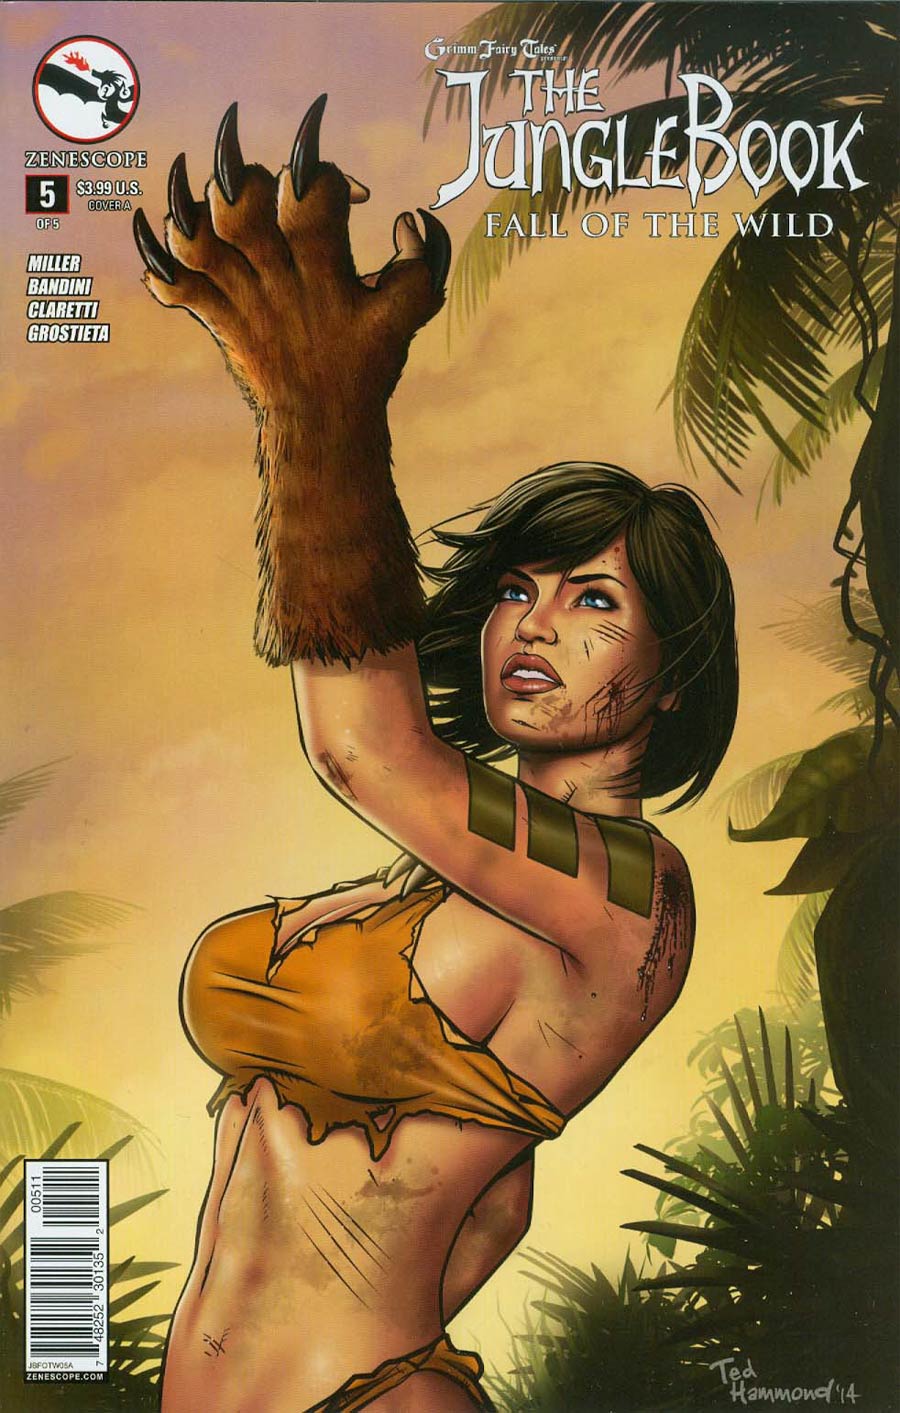 Grimm Fairy Tales Presents Jungle Book Fall Of The Wild #5 Cover A Ted Hammond